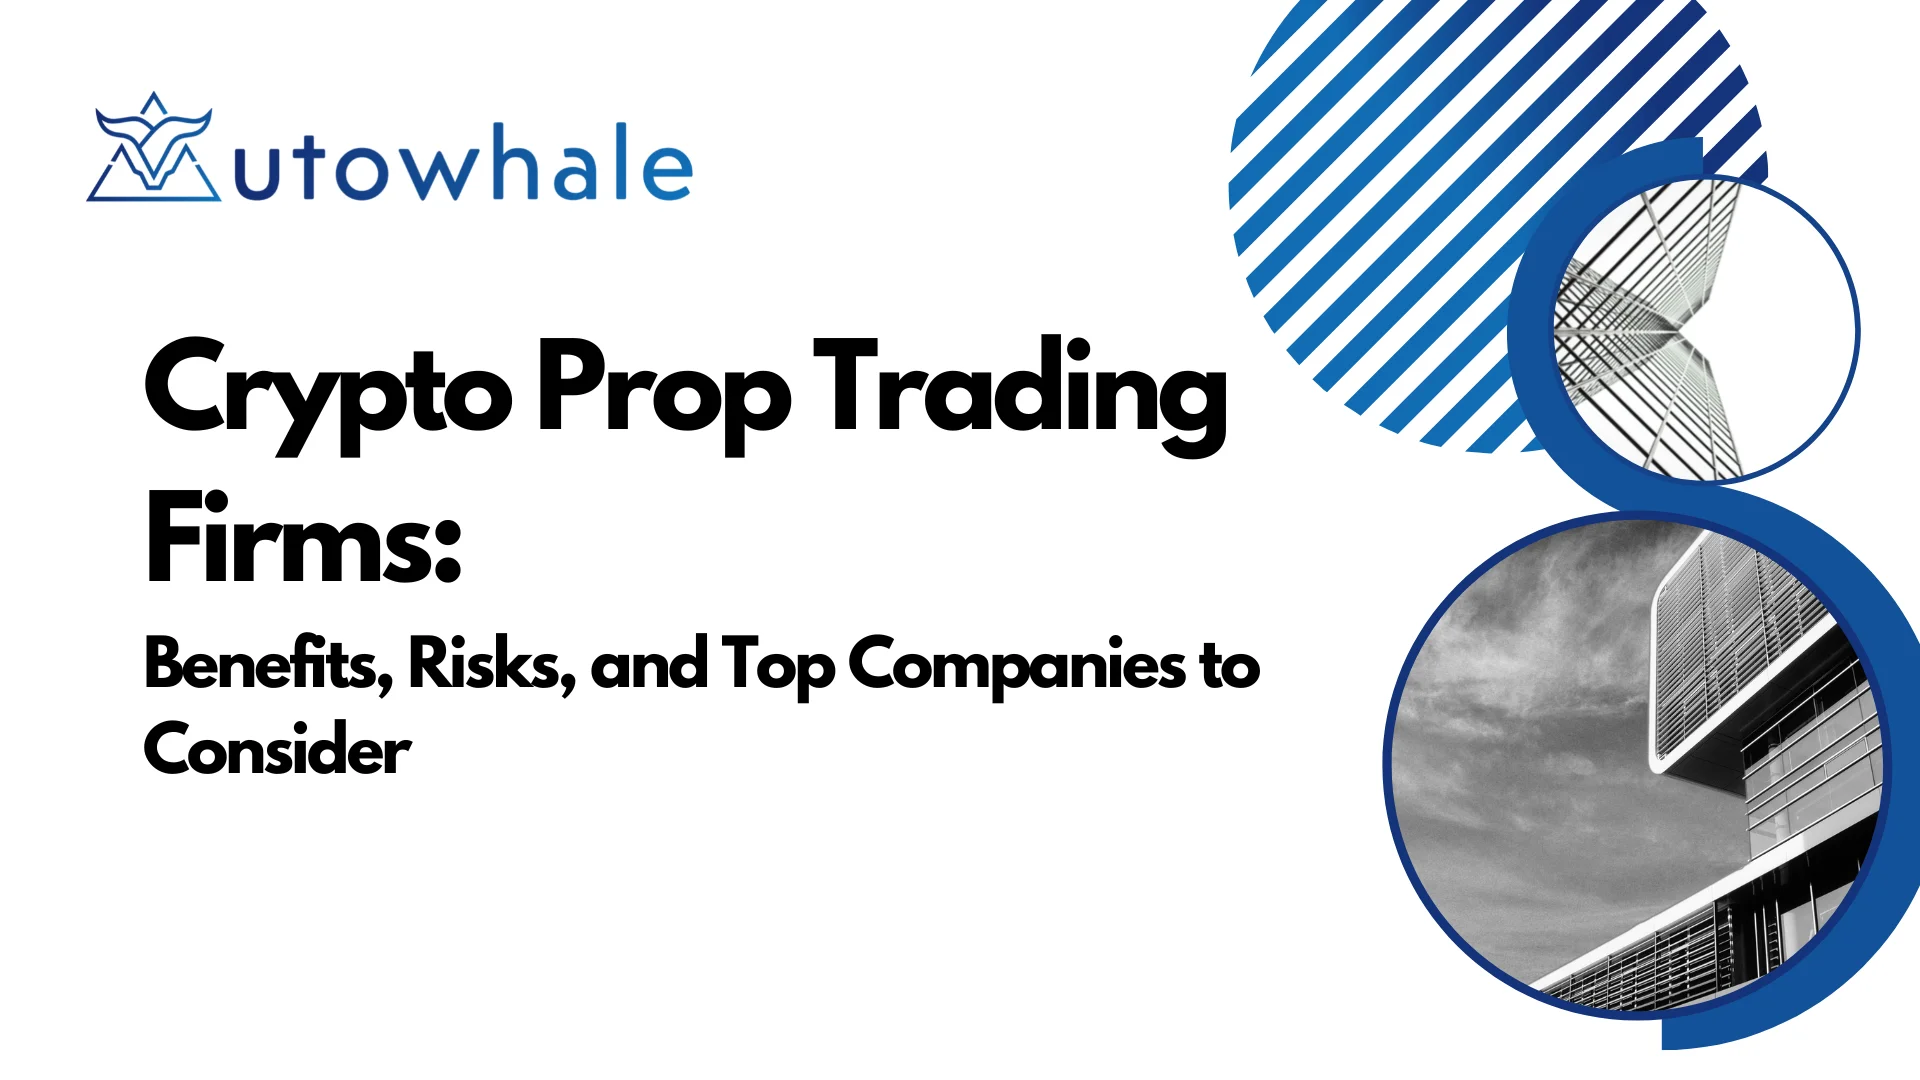 Crypto Prop Trading Firms: Benefits, Risks, and Top 5 Companies to Consider